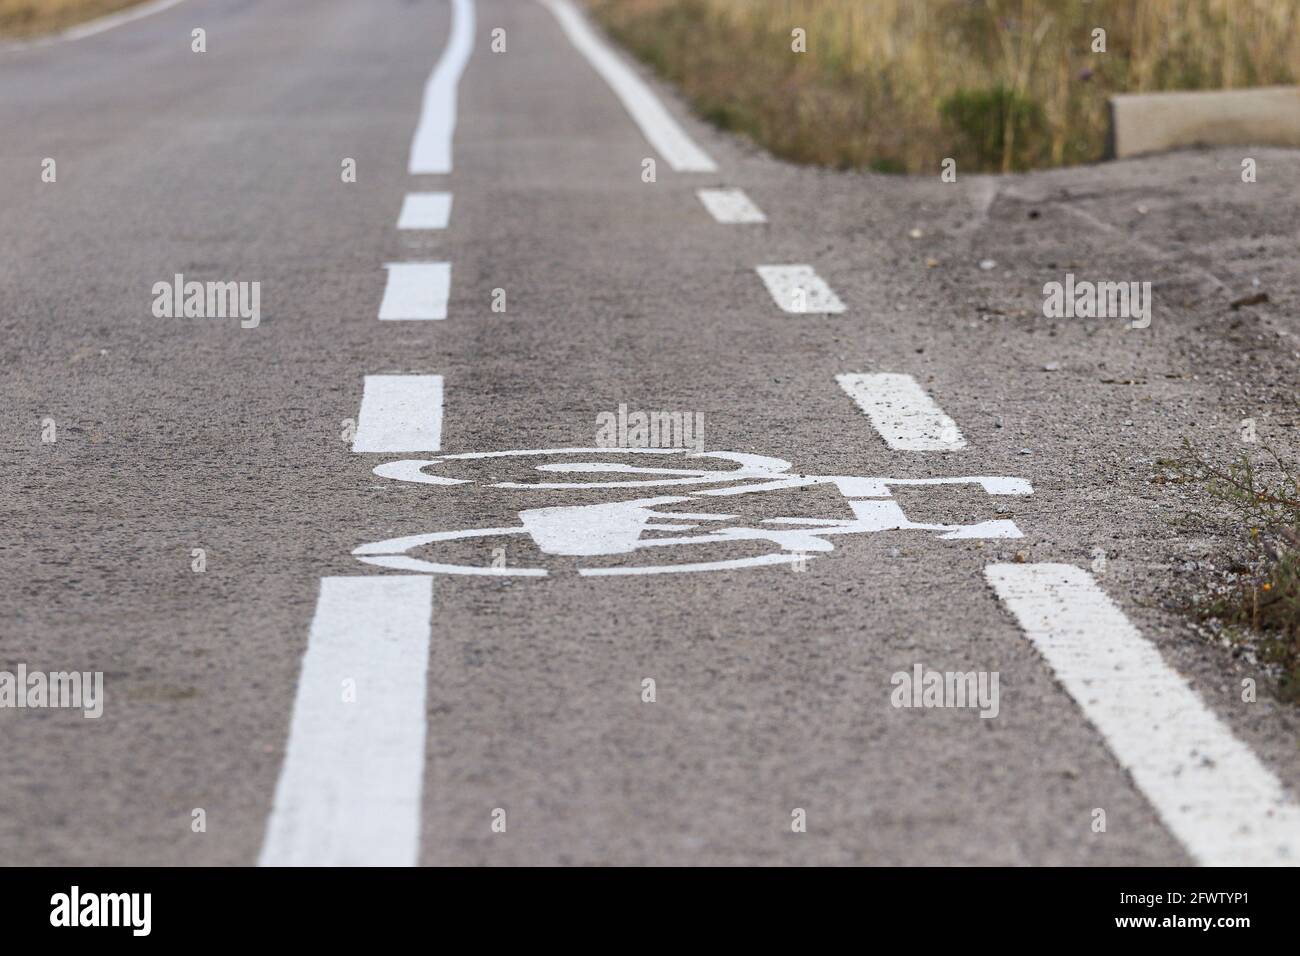 Road with bicycle path. Bicycle lane signage Stock Photo